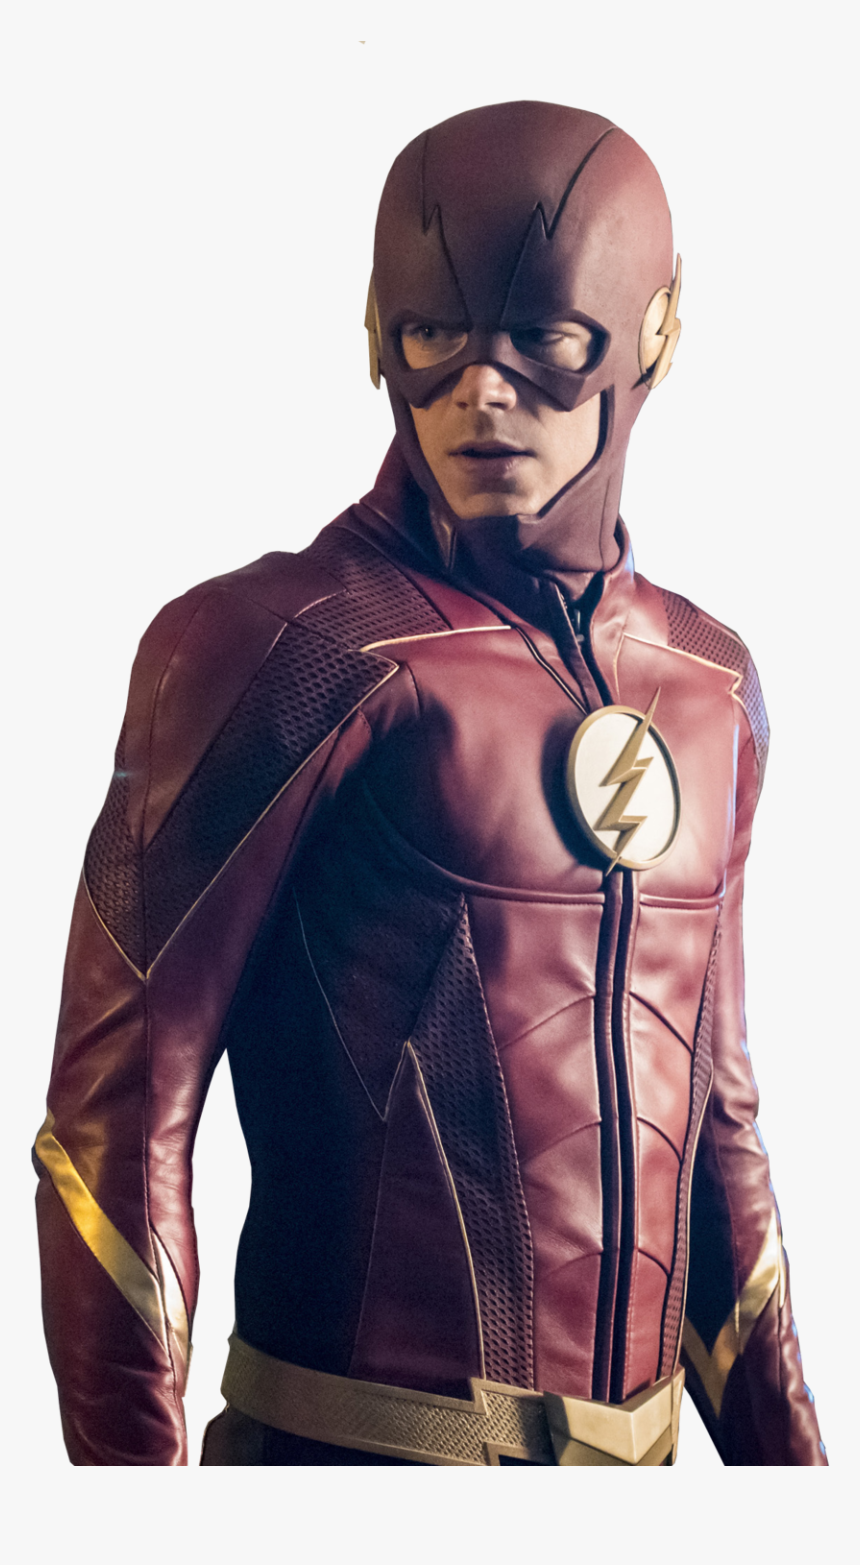 Season 4 Episode The Flash Reborn Mixed Signals - Grant Gustin New Suit, HD Png Download, Free Download